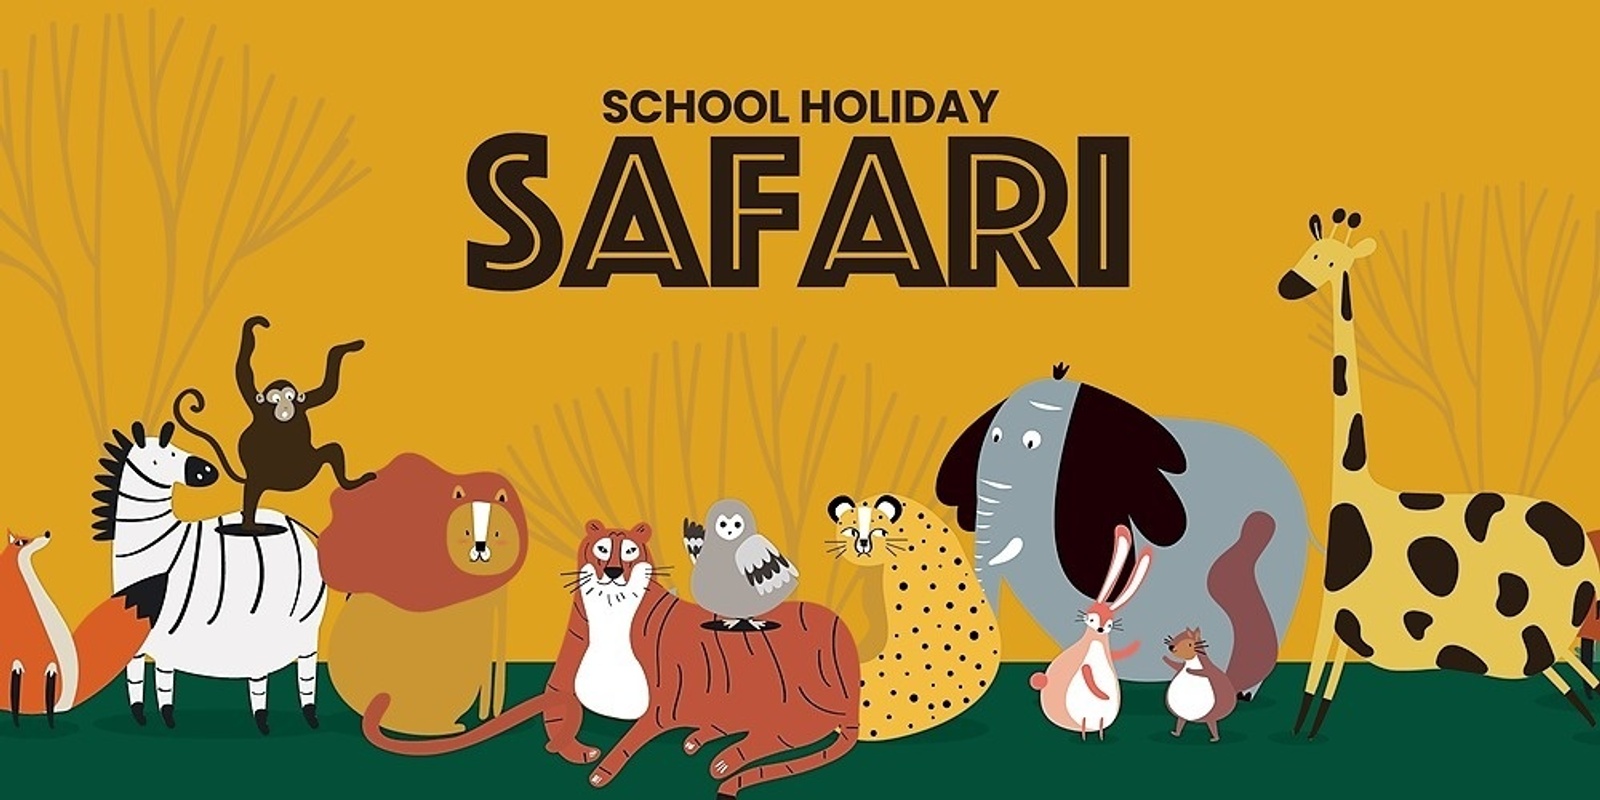 Banner image for Cleveland Central School Holiday Safari